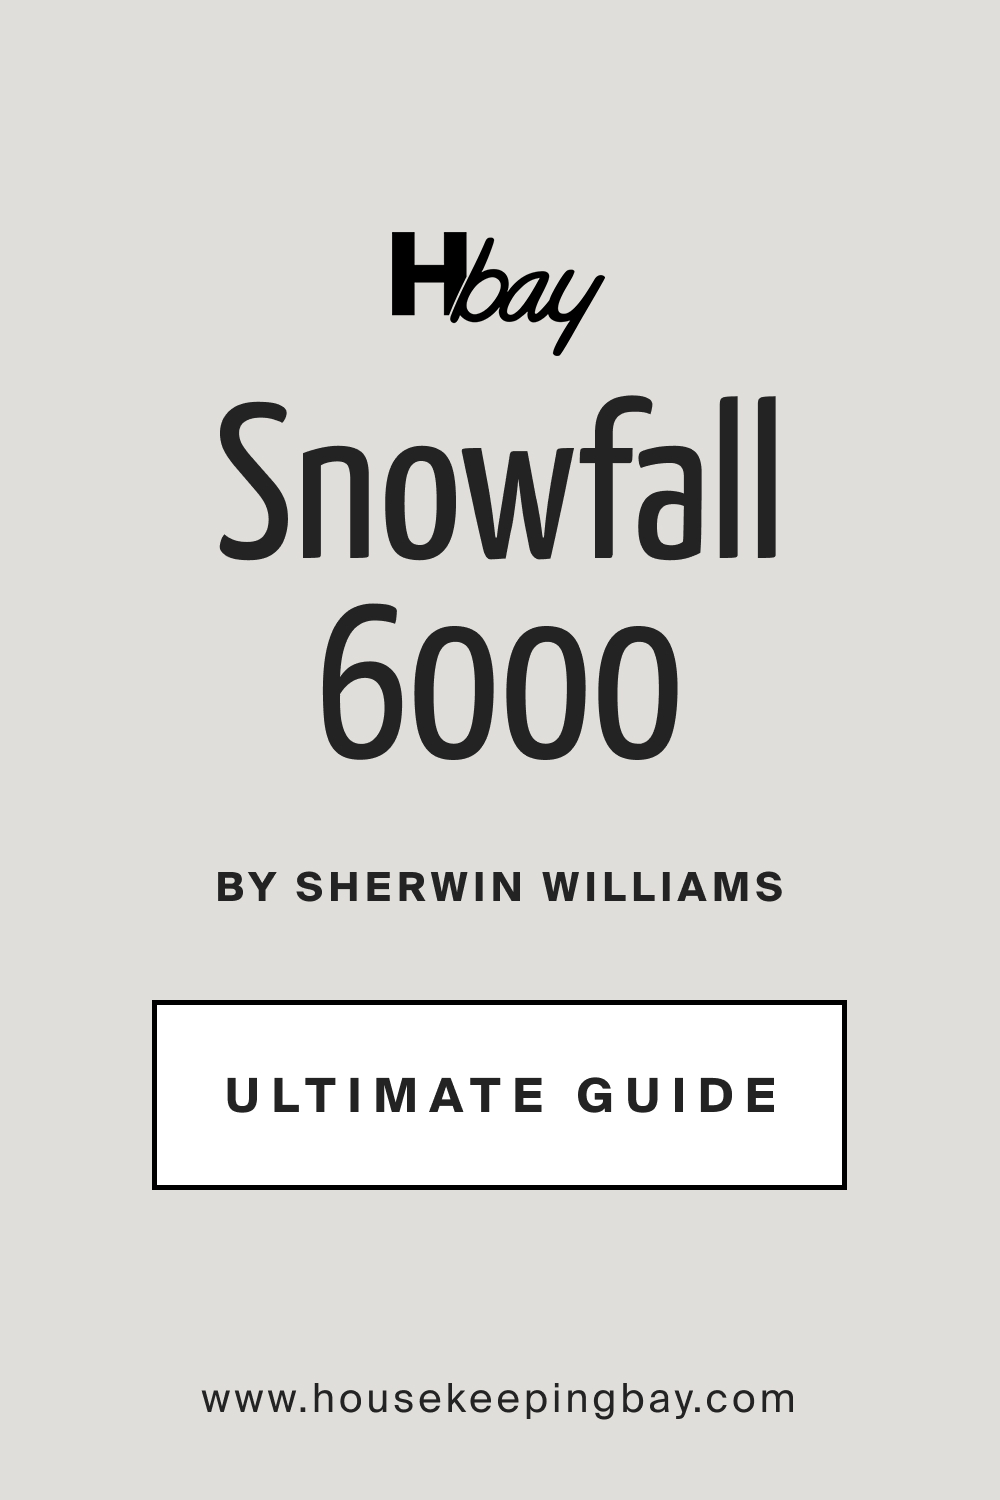 SW 6000 Snowfall by Sherwin Williams Ultimate Guide